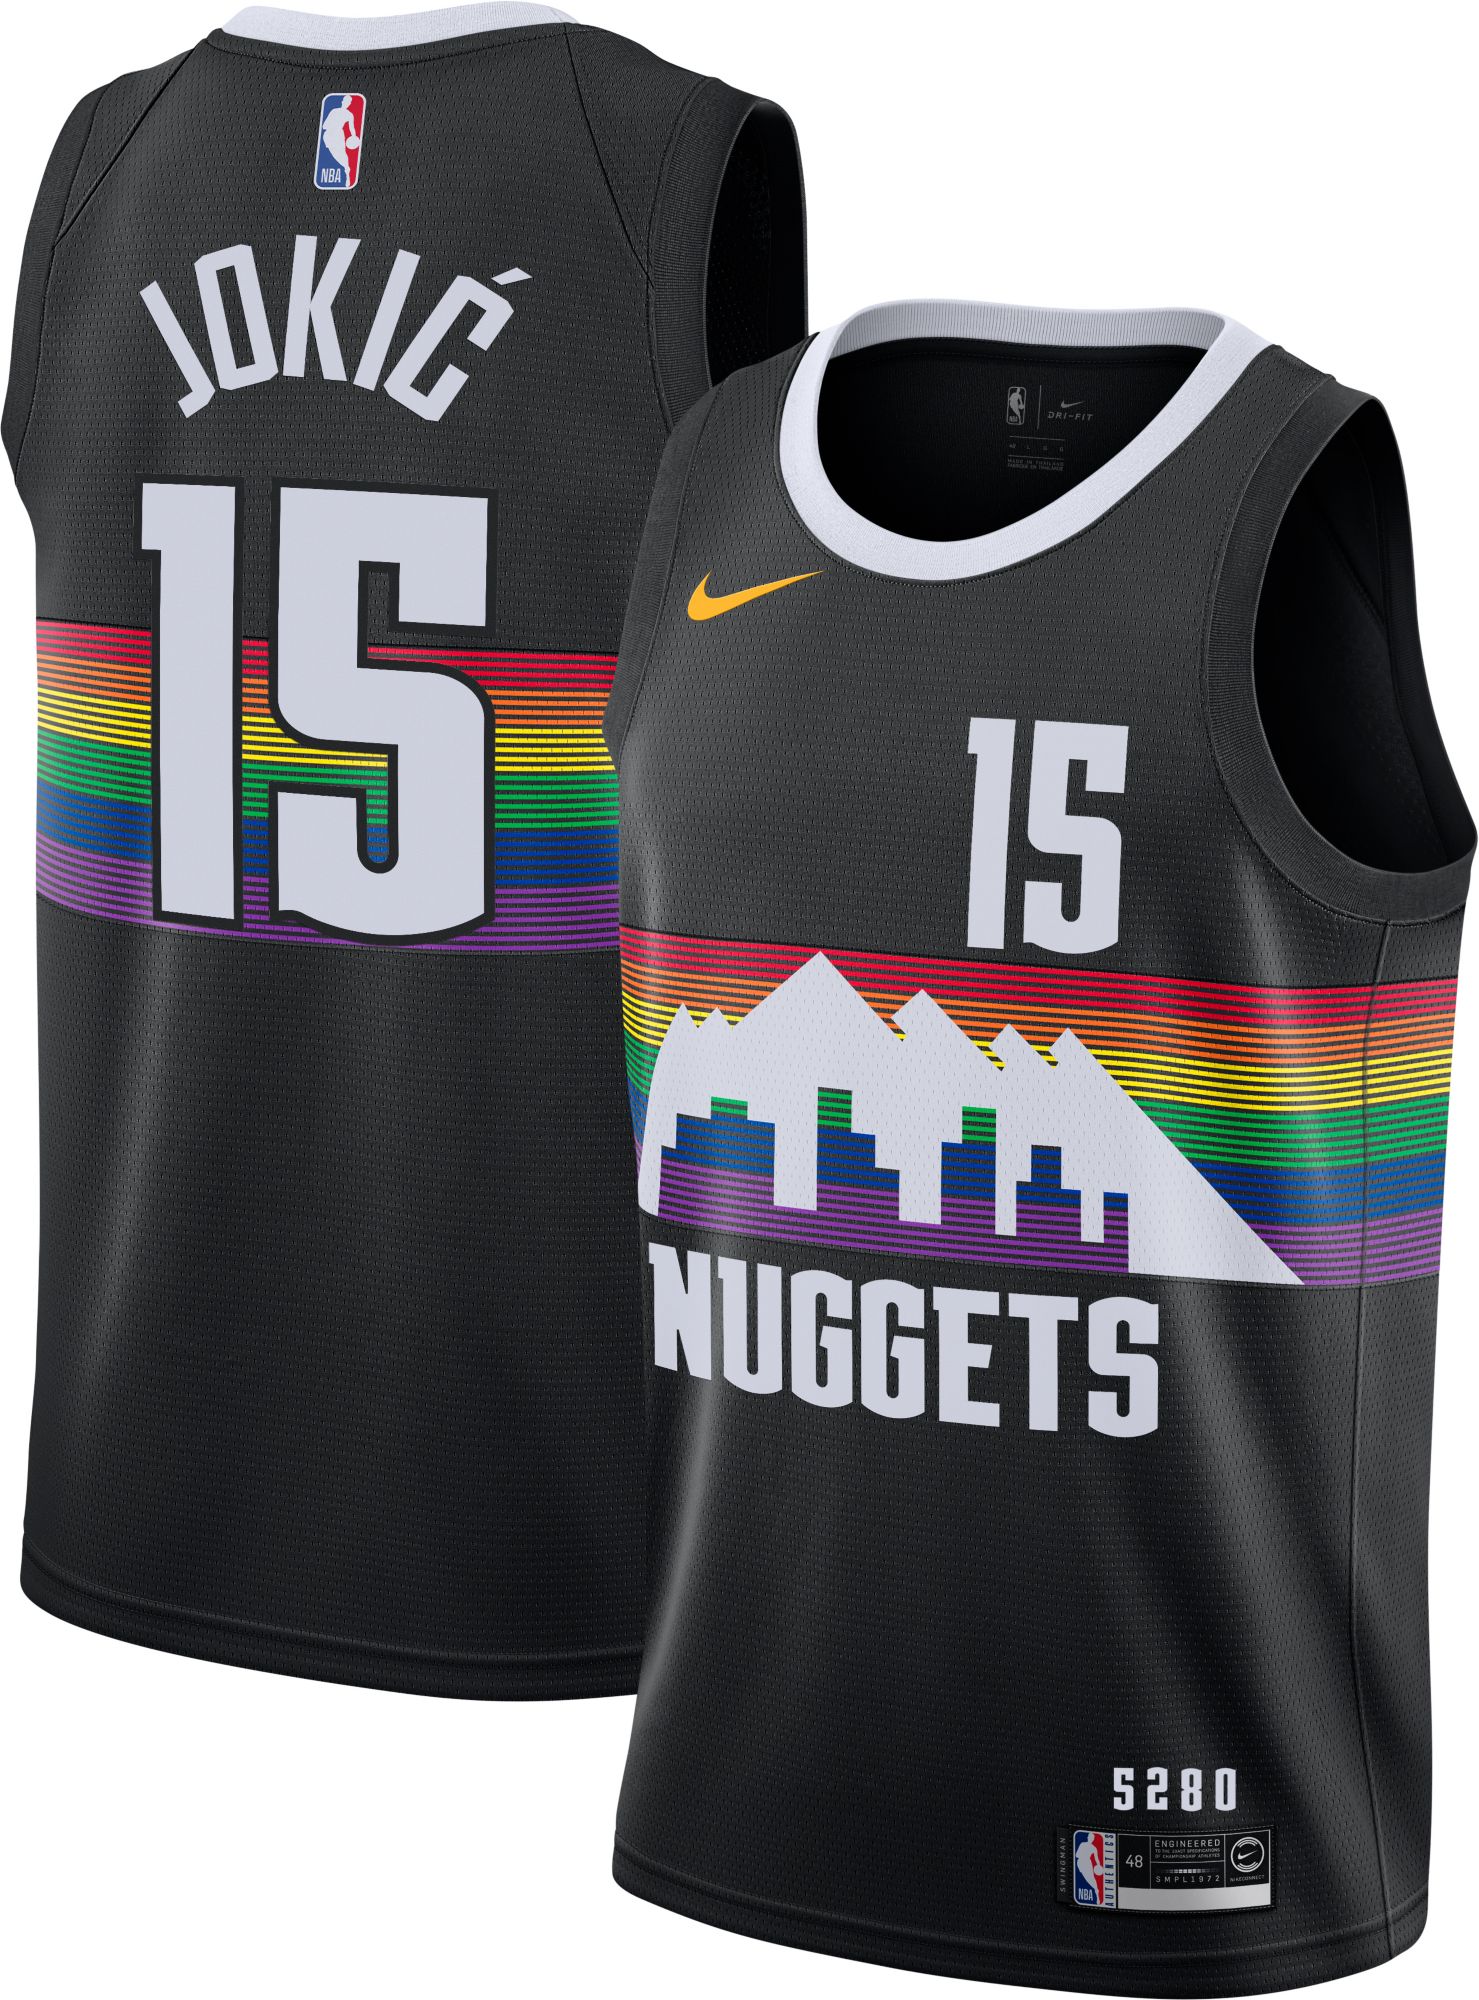 nuggets nike jersey